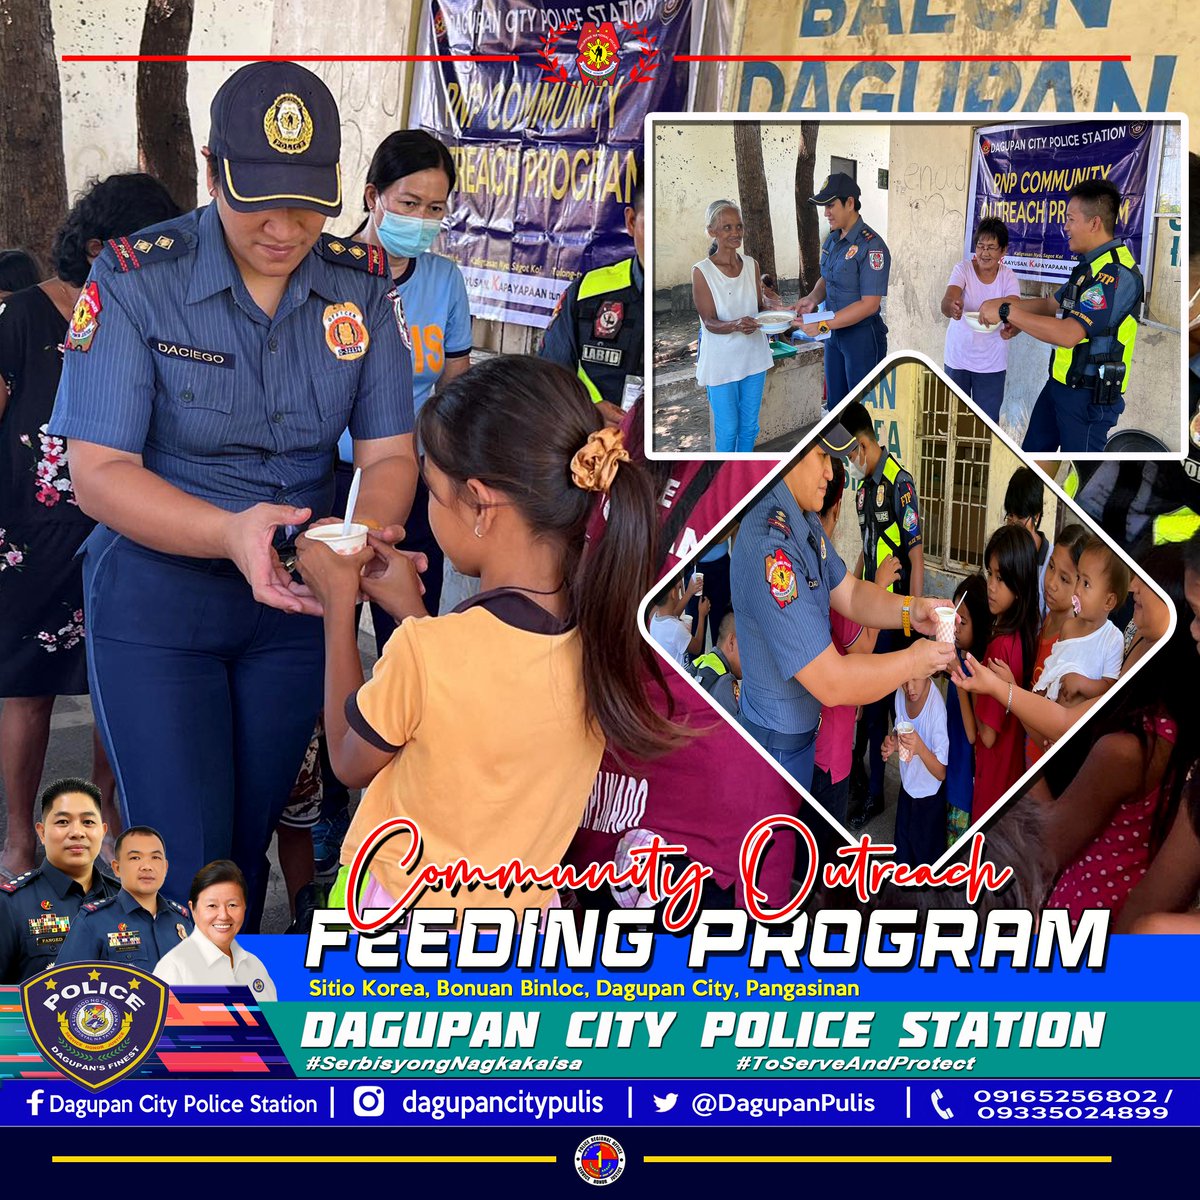 Personnel of Dagupan City Police Station led by PCPT SHAYNE G DACIEGO, PCAD Officer, under the leadership of PLTCOL BRENDON B PALISOC, OIC, together with police trainees and Pastor Freddieric Mariano, KASIMBAYANAN Adviser, conducted Feeding Program at Bonuan Binloc, Dagupan City.